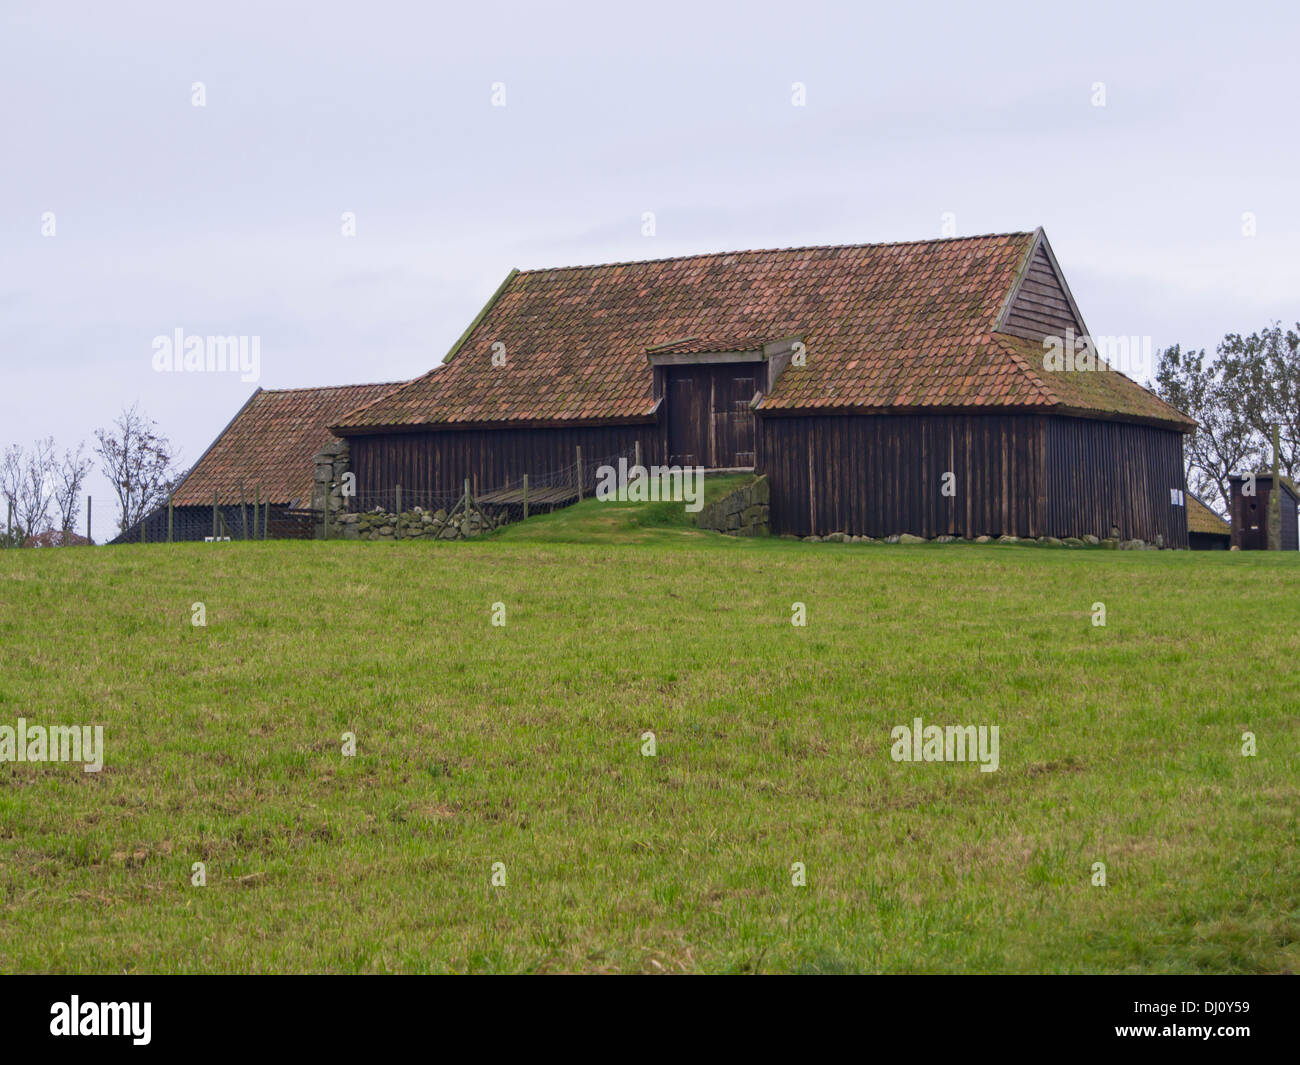 Old wooden barn with tiled roof in traditional building style of Jæren Norway , near Stavanger, conservation project at local Jæren museum Stock Photo